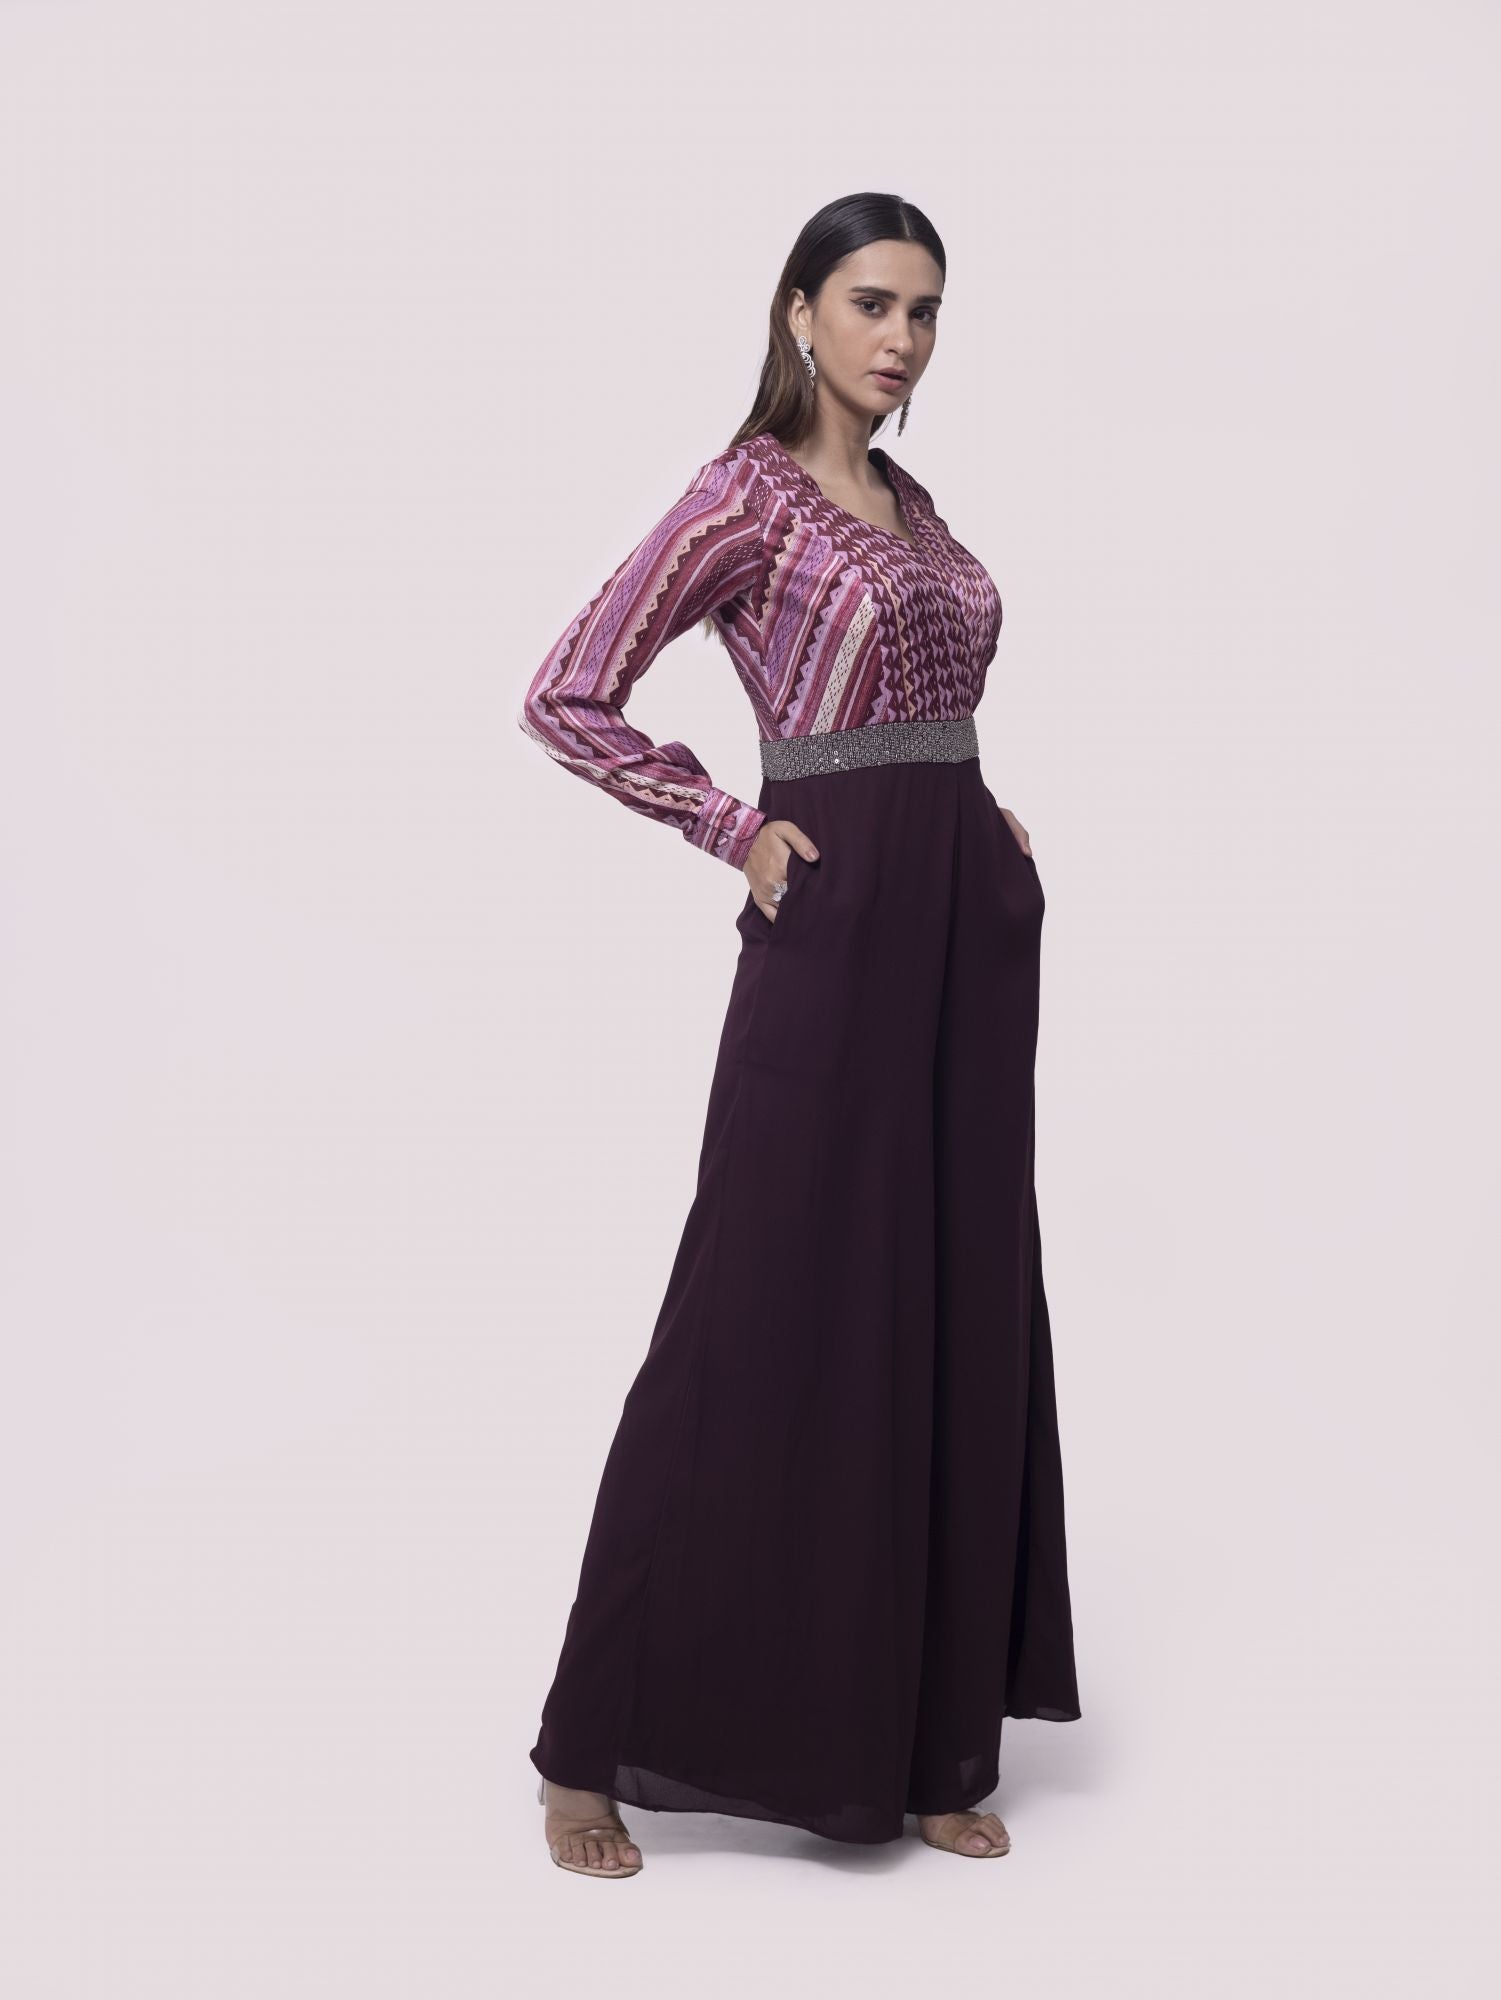 Buy wine color satin print georgette Indowestern dress online in USA. Shop the best and latest designs in embroidered sarees, designer sarees, Anarkali suit, lehengas, sharara suits for weddings and special occasions from Pure Elegance Indian fashion store in USA.-side